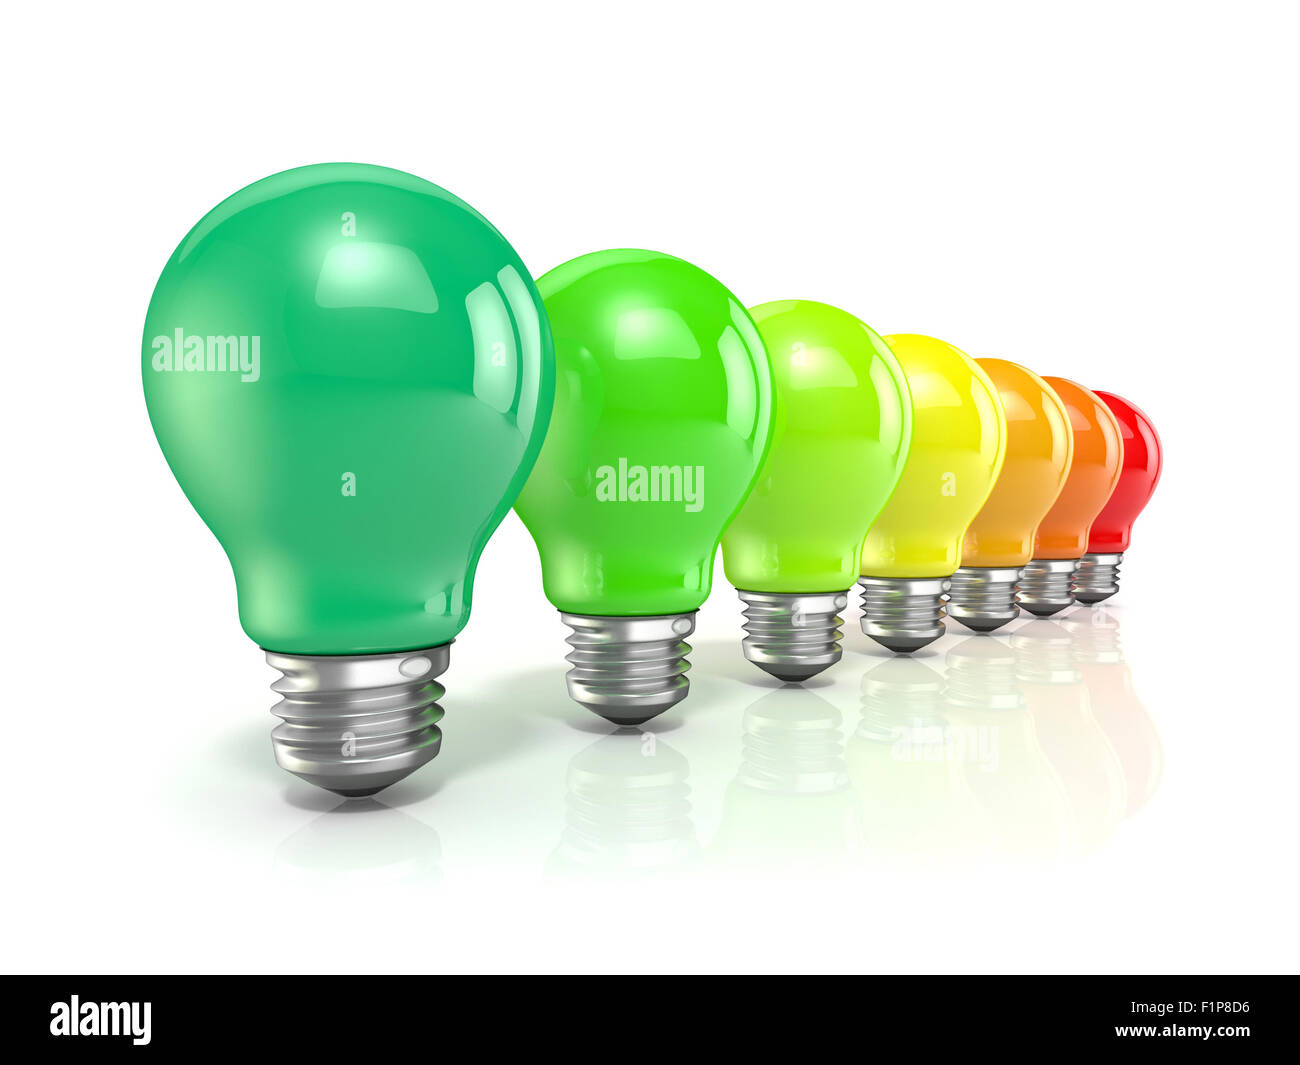 Energy efficiency concept with light bulbs. 3D render illustration isolated on white background Stock Photo